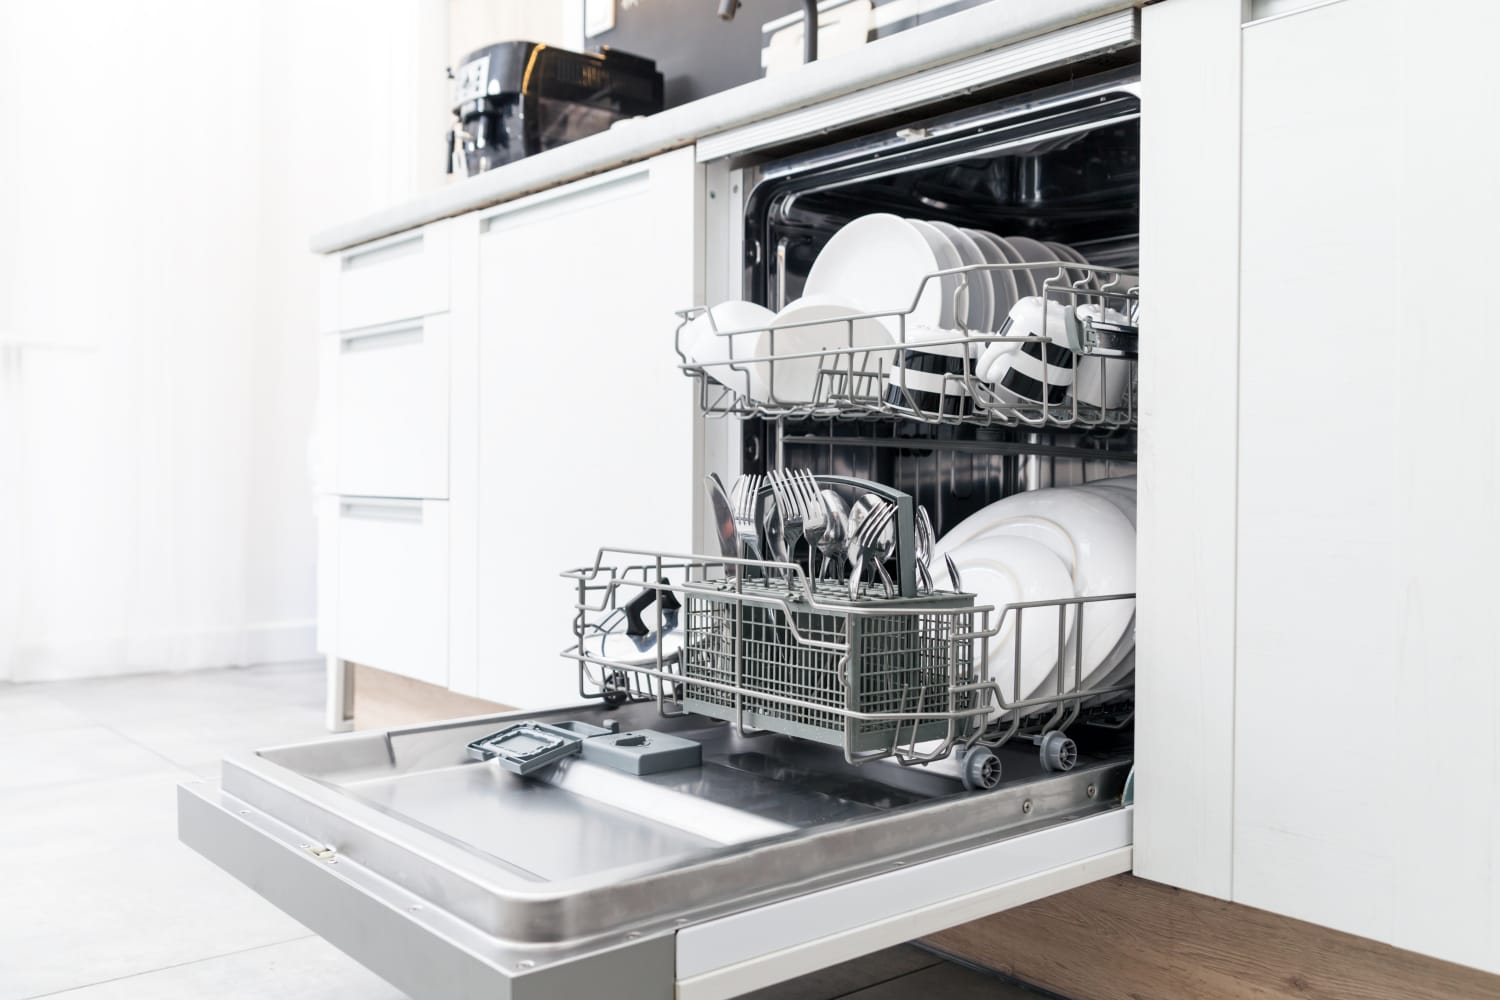 6 Reasons Your Dishes Aren’t Getting Clean within the Dishwasher